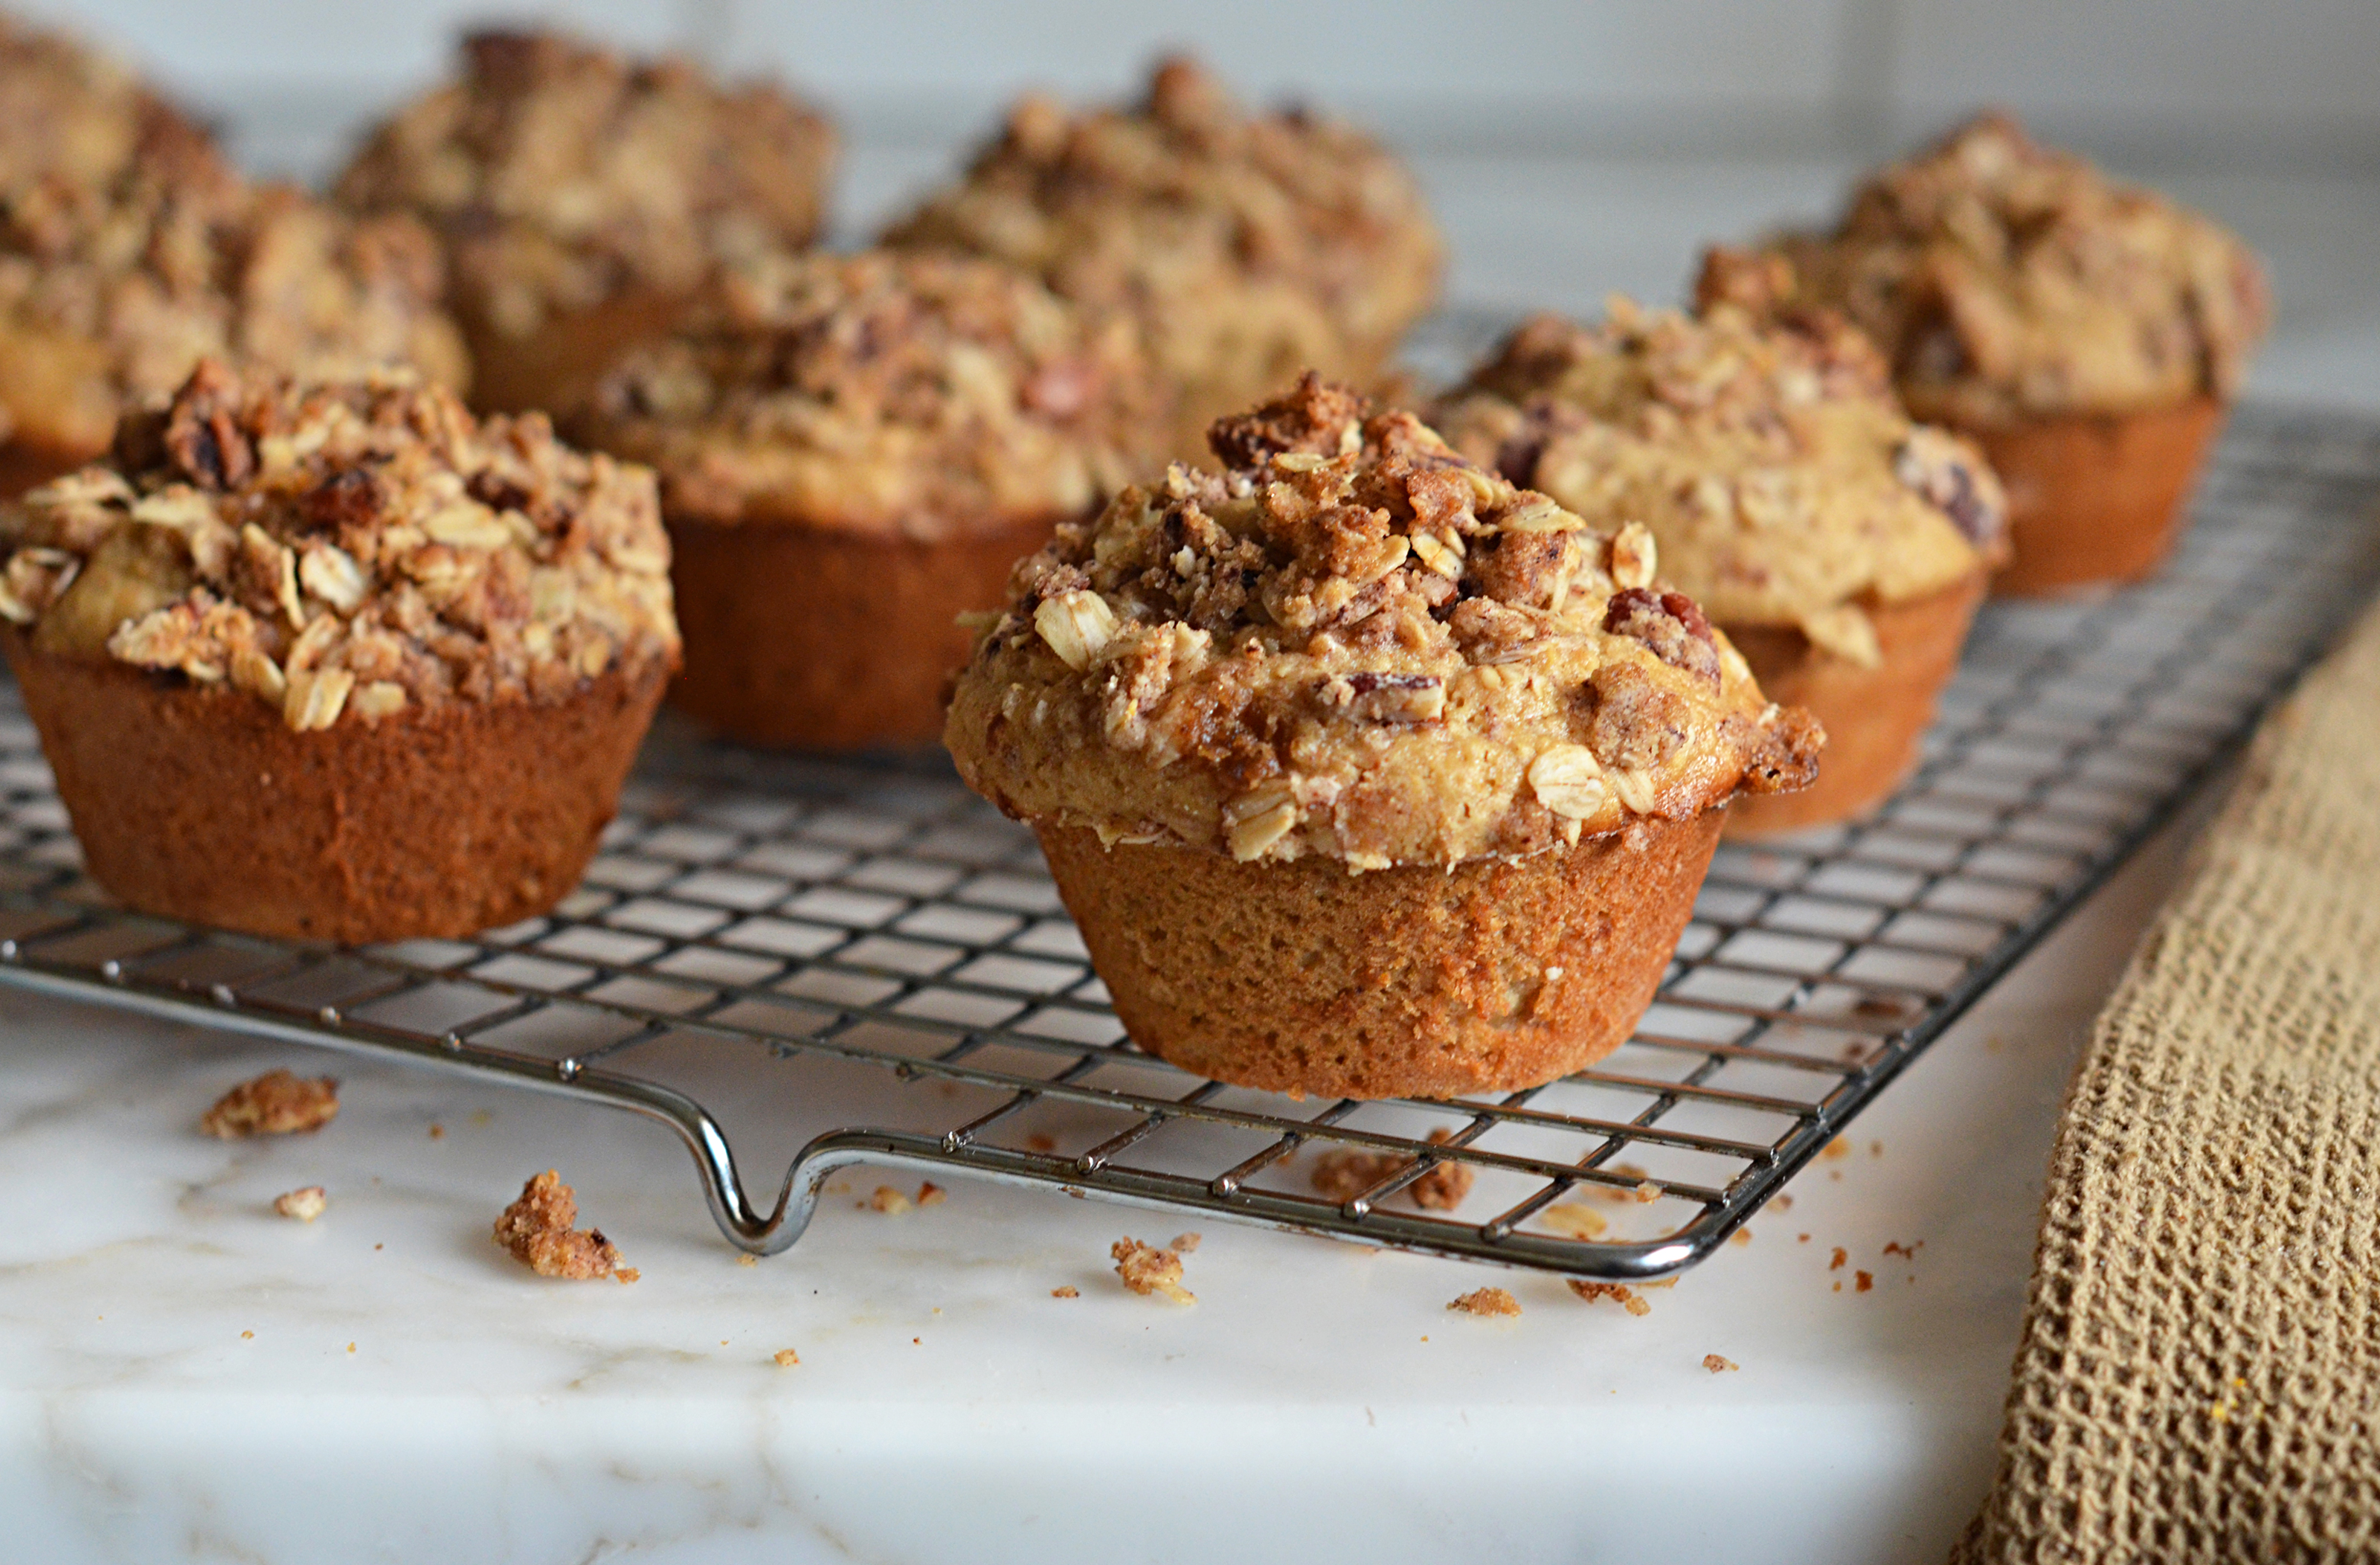 Easy Streusel Topping Recipe